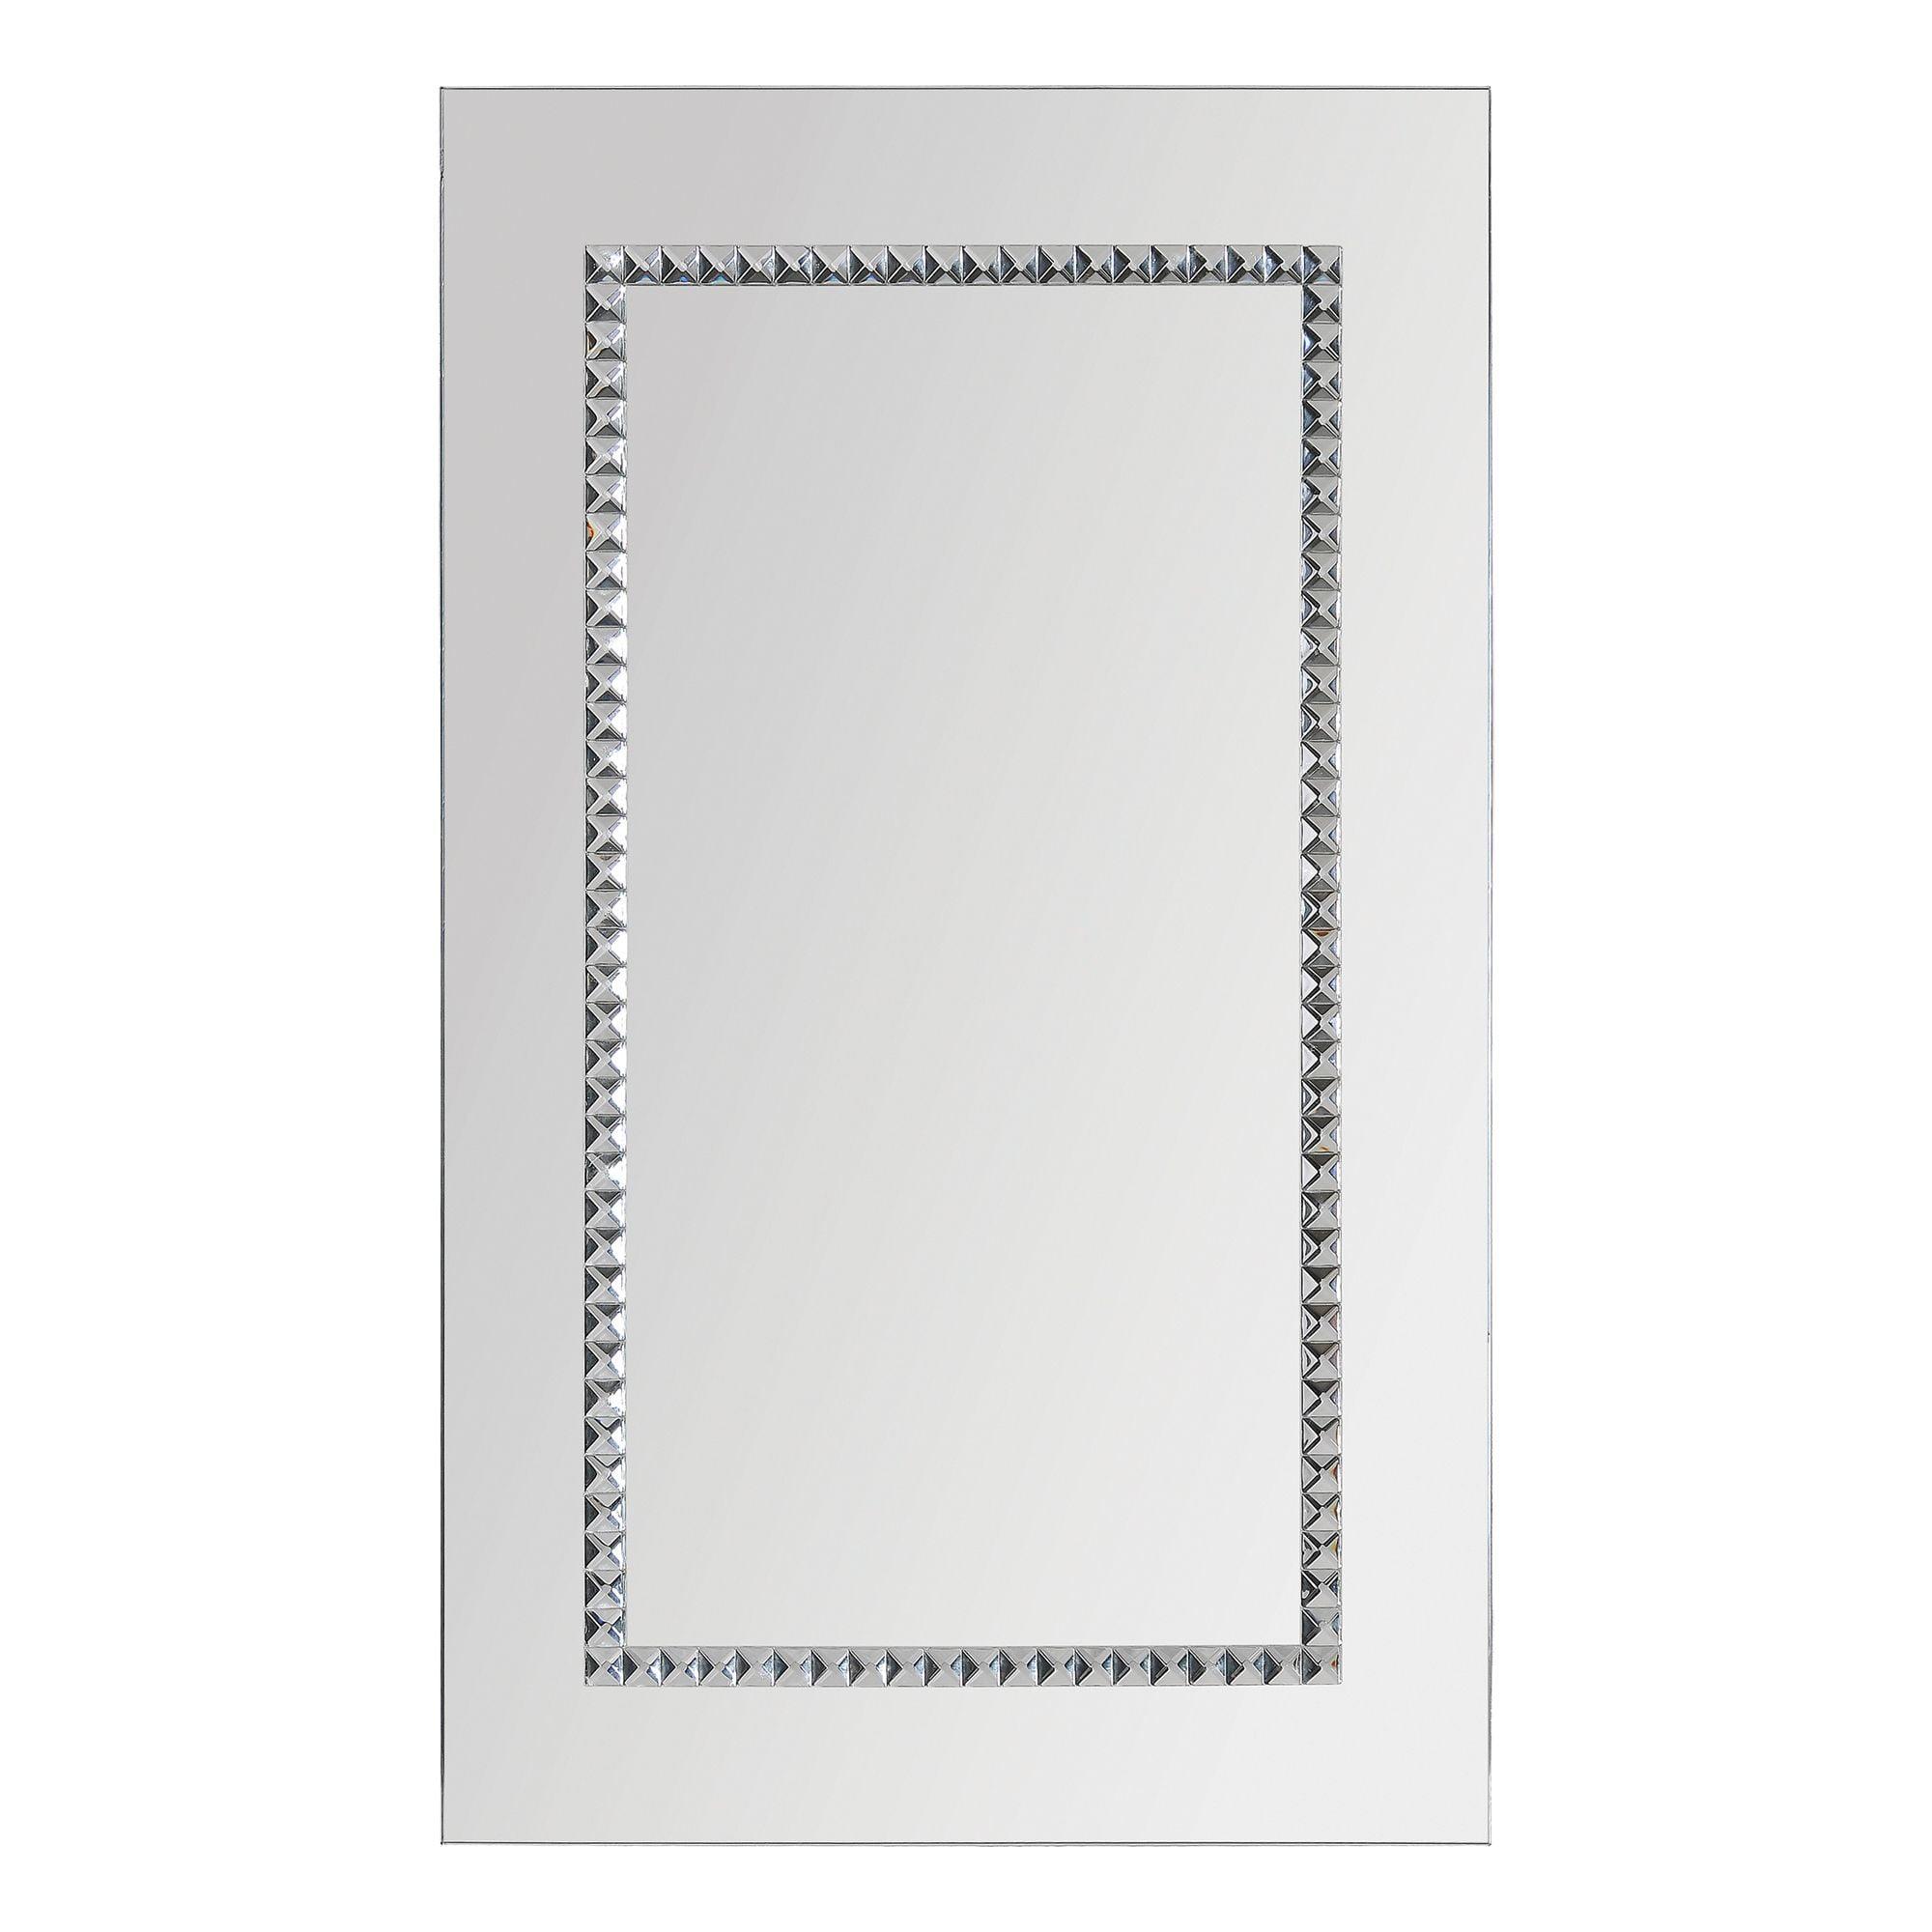 Elegant 40" Silver Rectangular Wall Mirror with Embedded Jewels